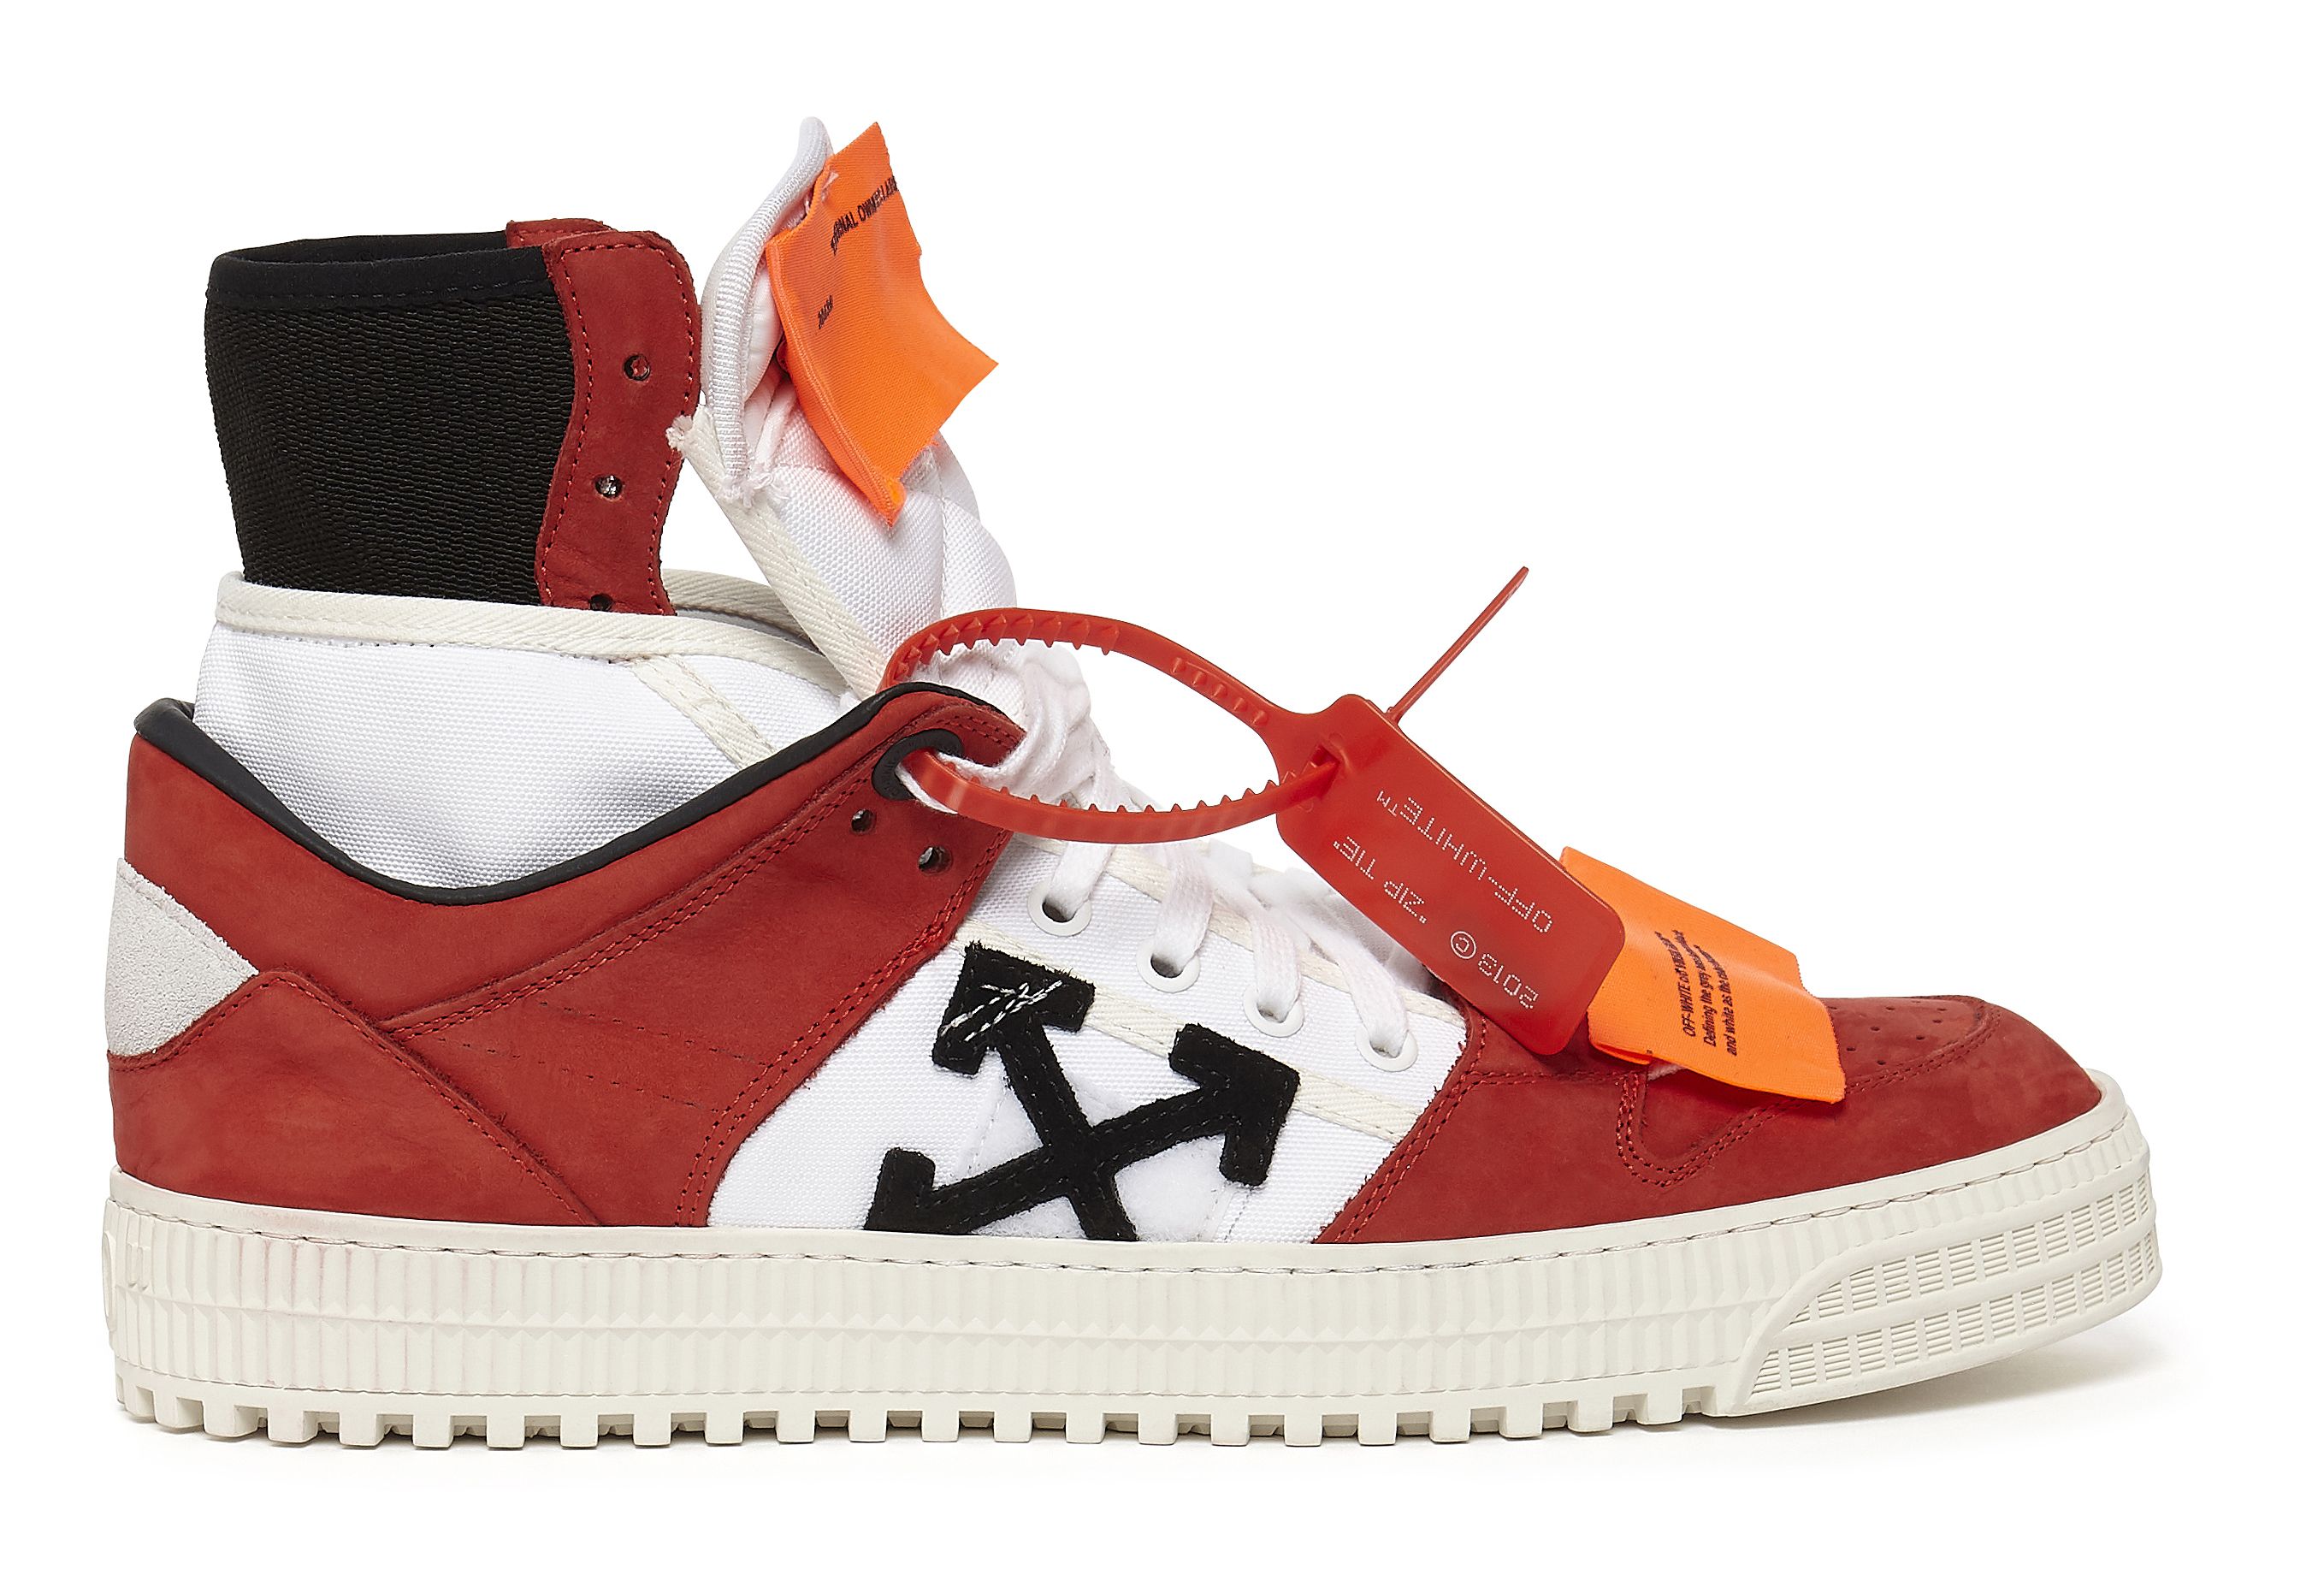 MR PORTER - Want to know the secret to Off-White c/o Virgil